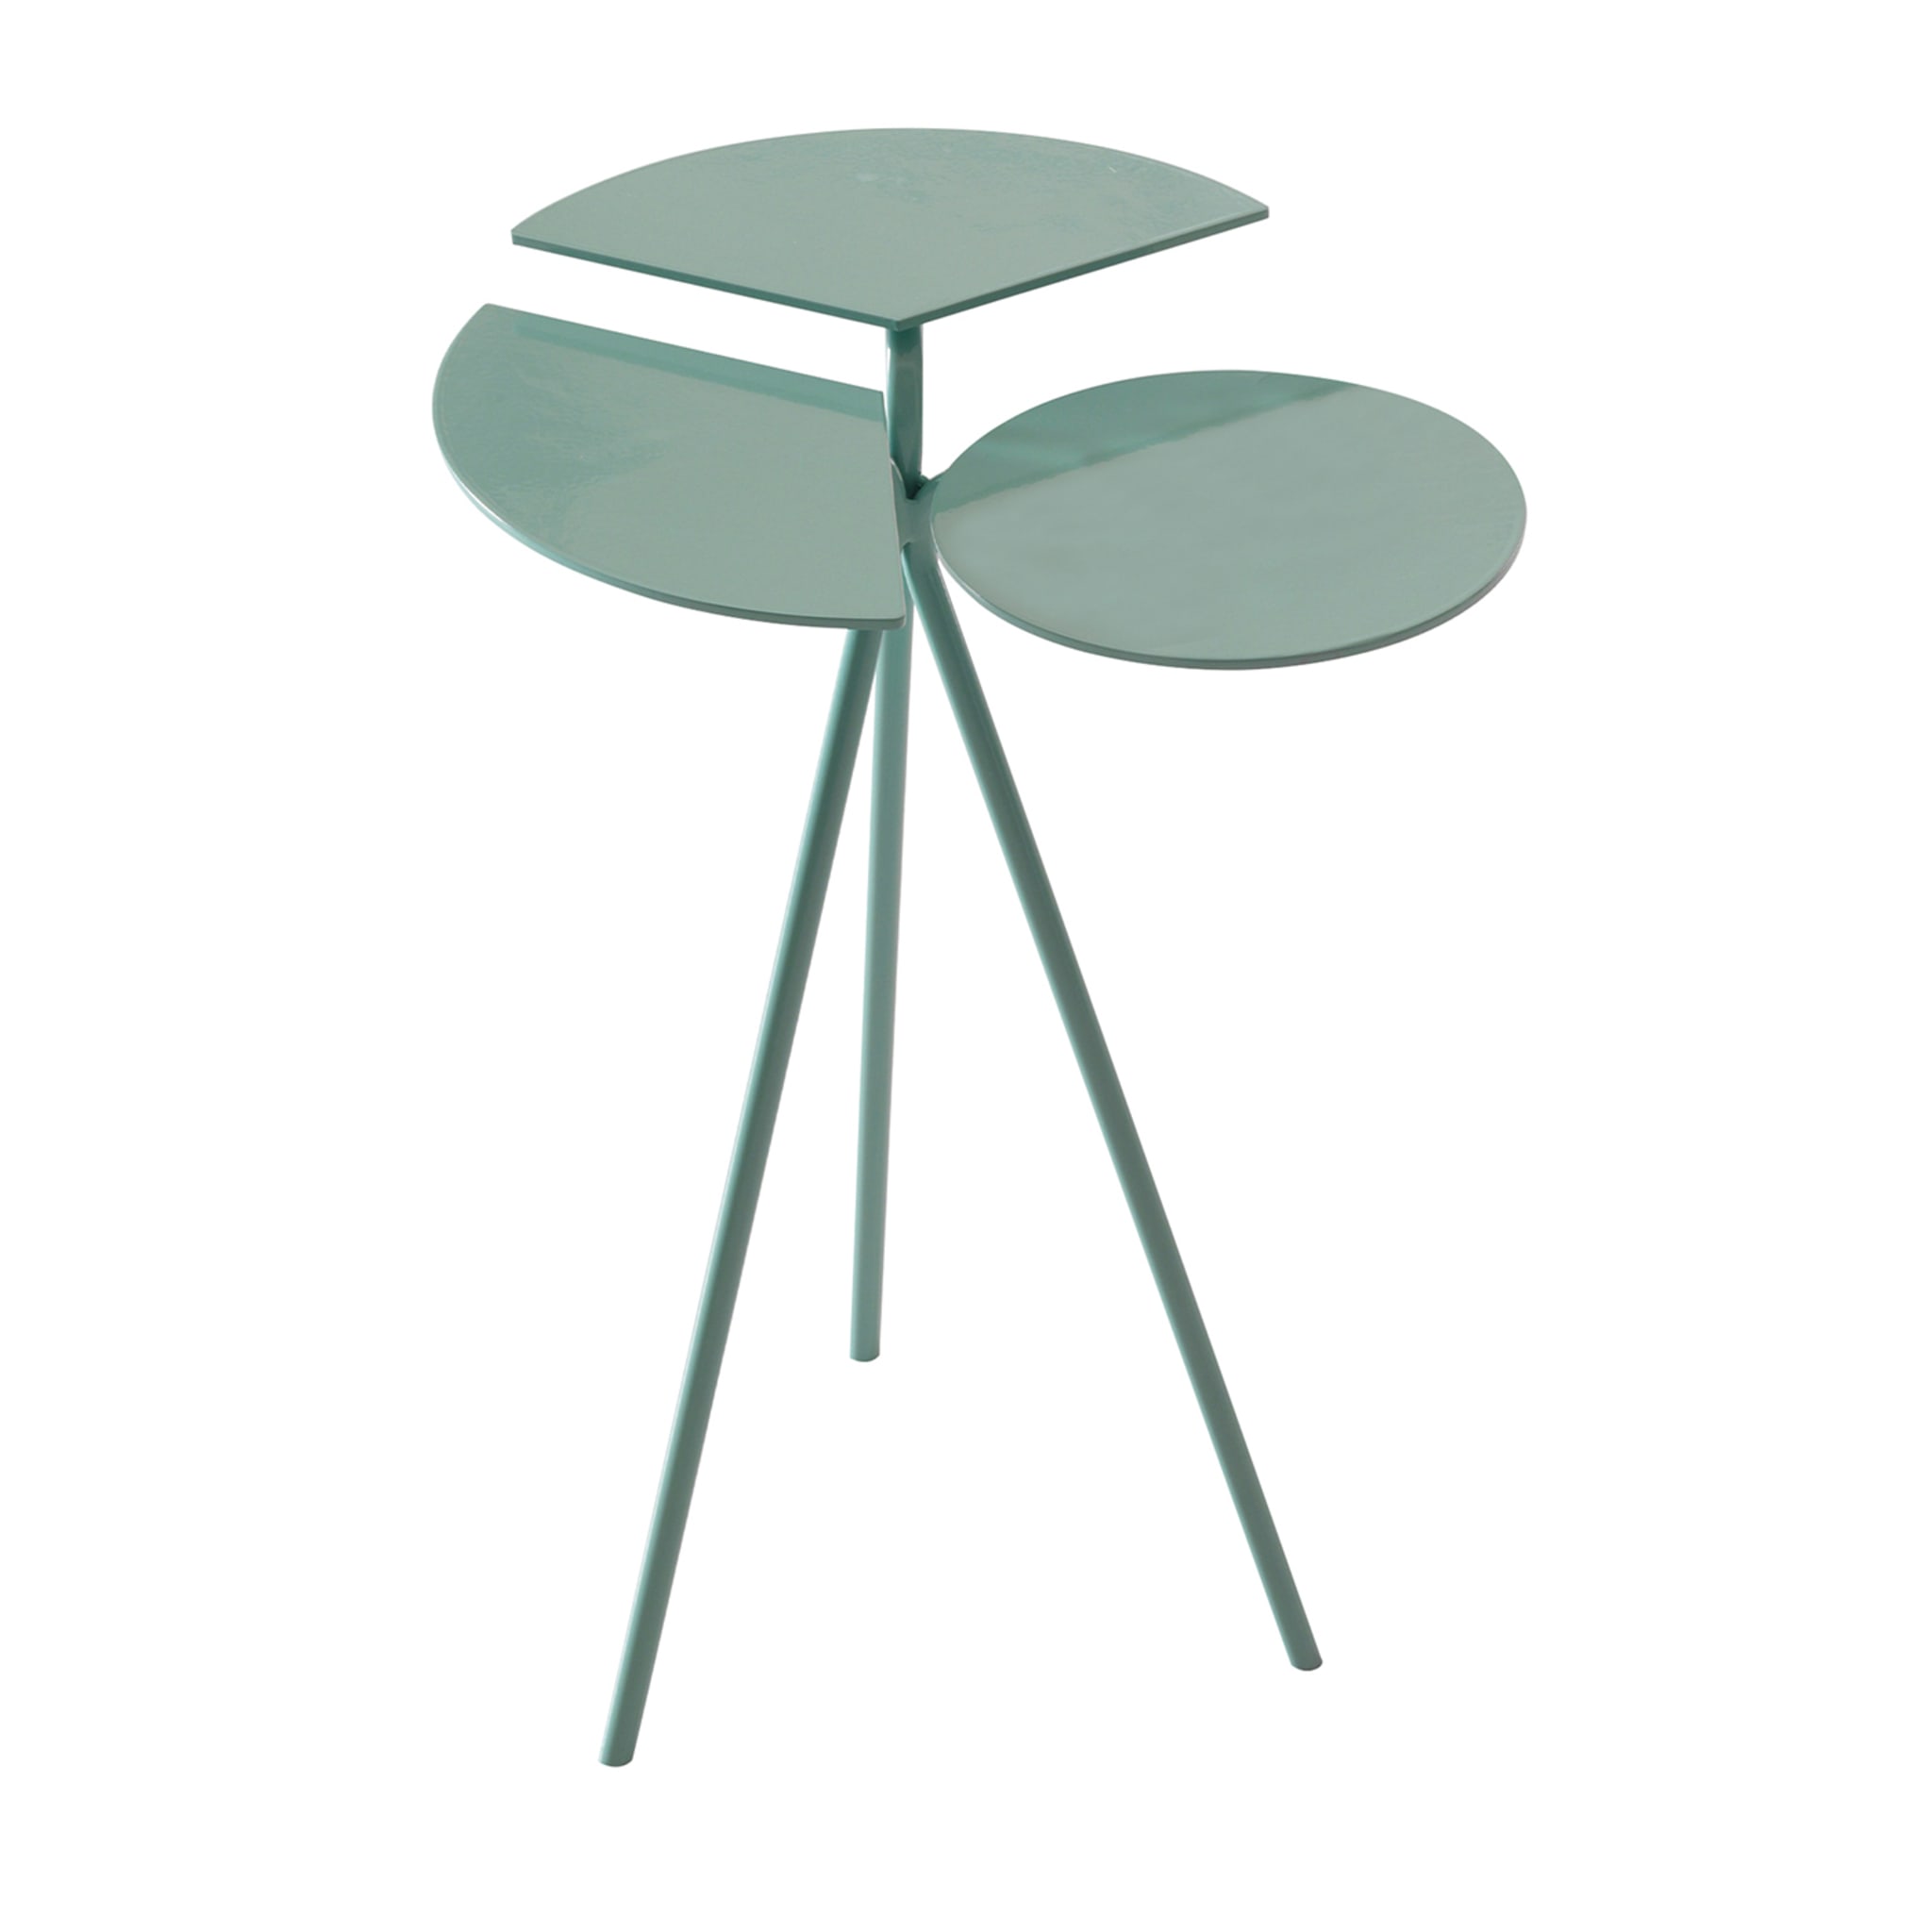 Lady Bug Green Side Table by Angeletti Ruzza - Main view